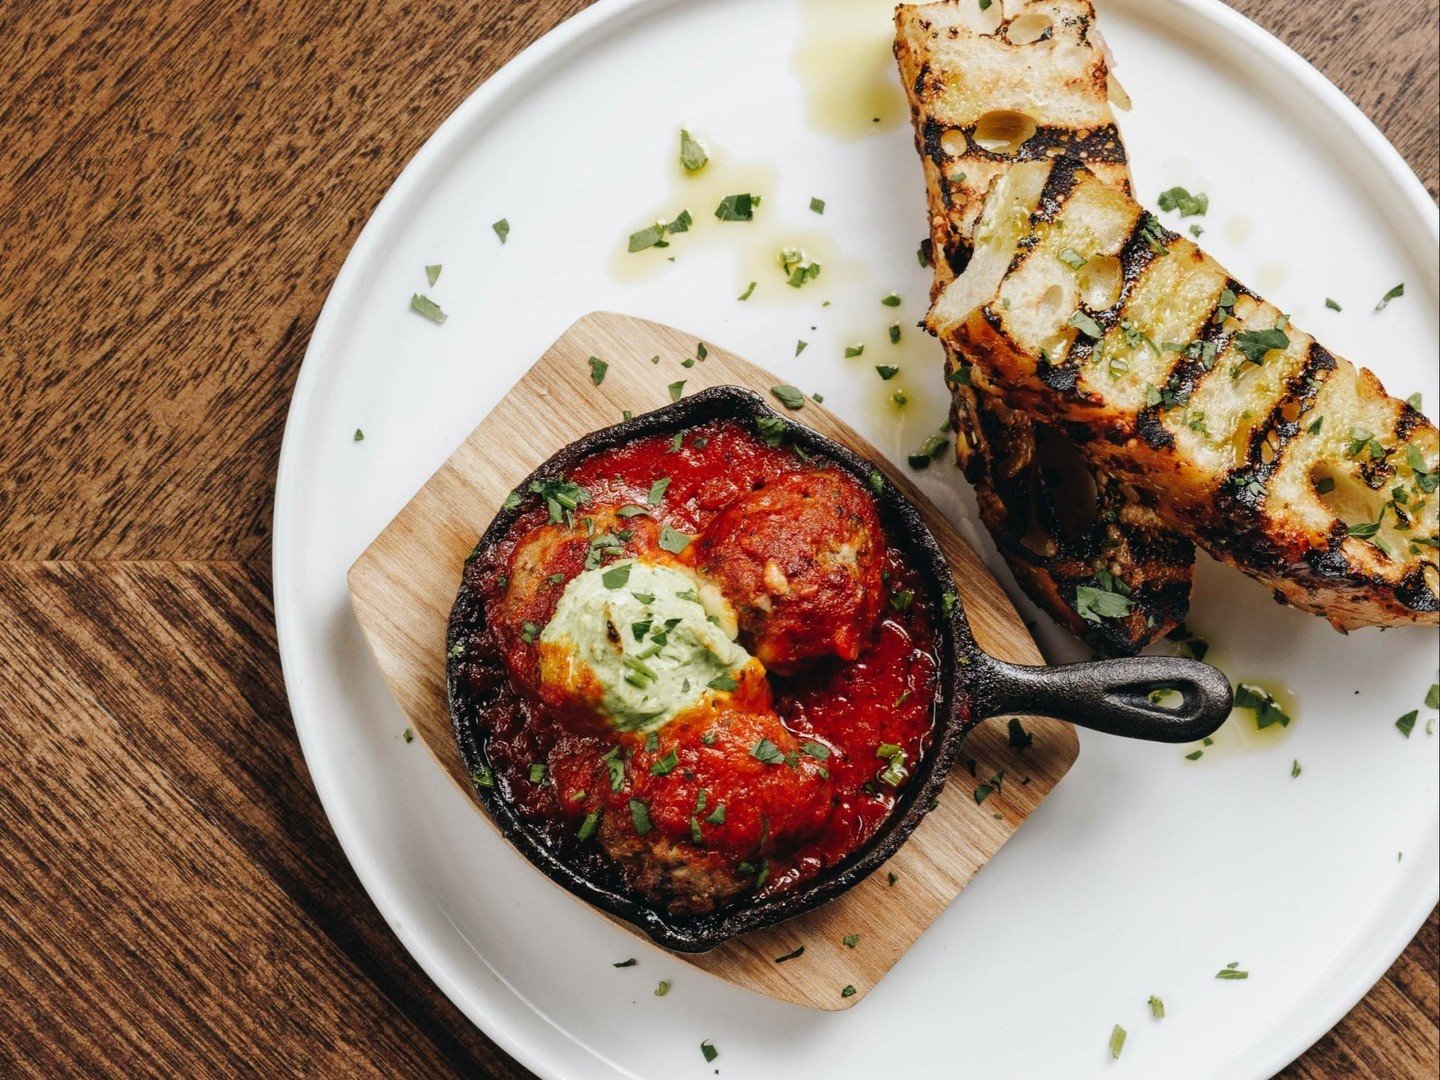 Looking for some comfort food on a rainy day? Start your week with our home-style Pork &amp; Veal Meatballs, simmered in tomato sugo, served with whipped herb feta, and freshly baked focaccia - this dish is Autumn at its best.

Did you know our signa